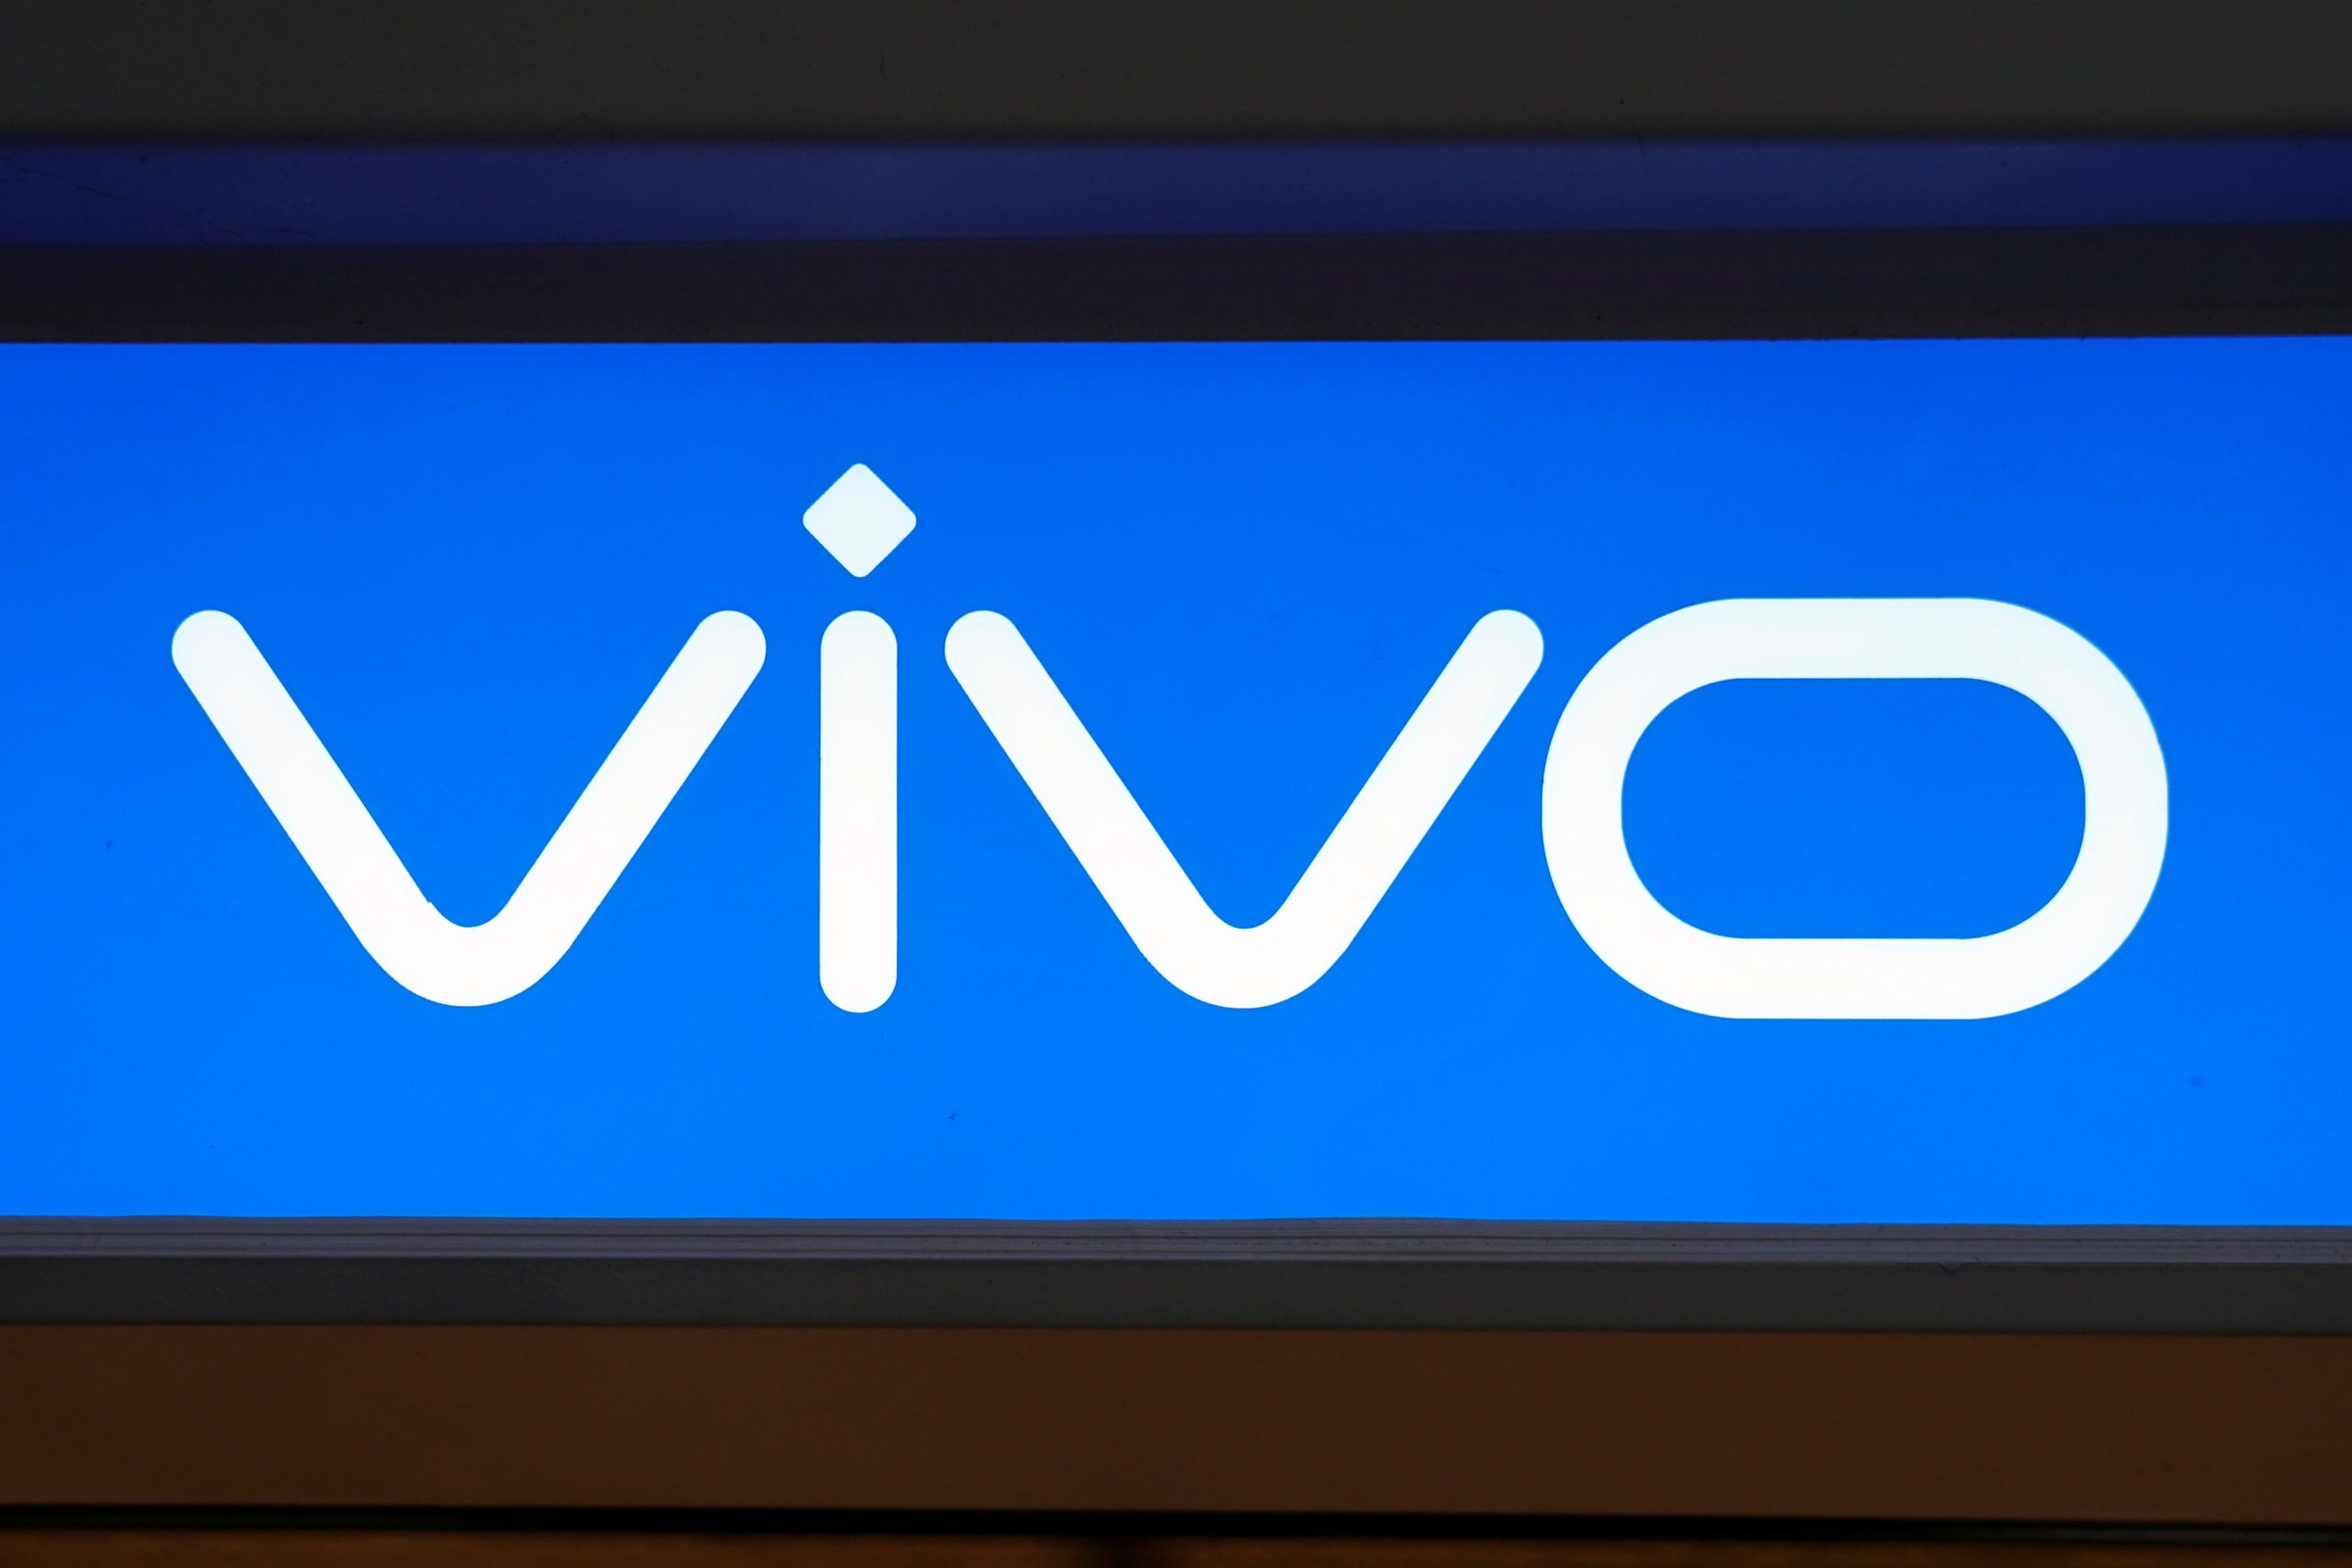 Indian financial crime agency ED raids Chinese-owned smartphone maker Vivo